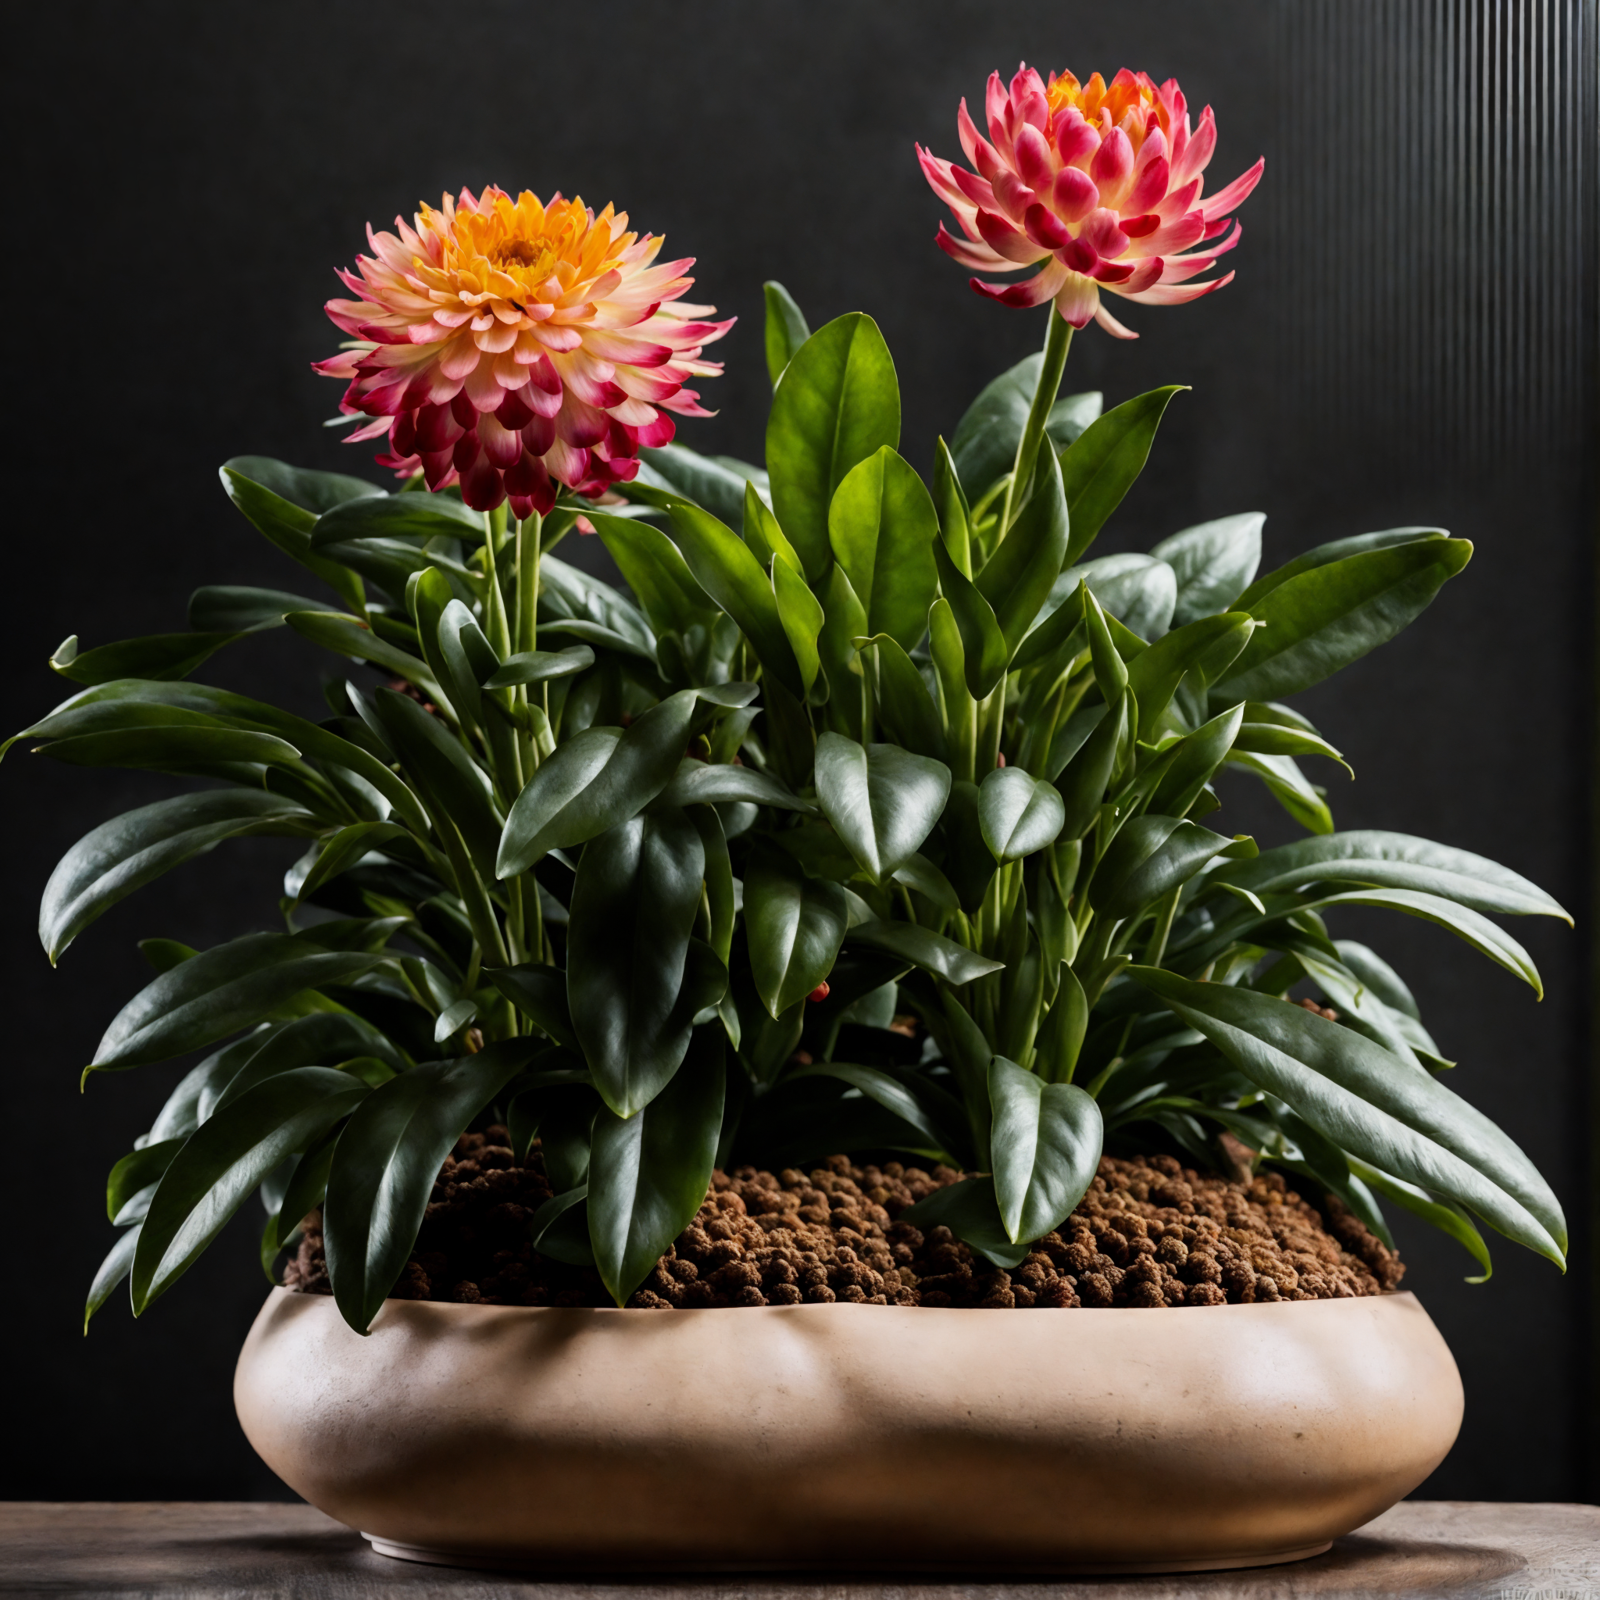 A bowl of Xerochrysum bracteatum (everlasting flowers) on a wooden table, with clear, neutral lighting.